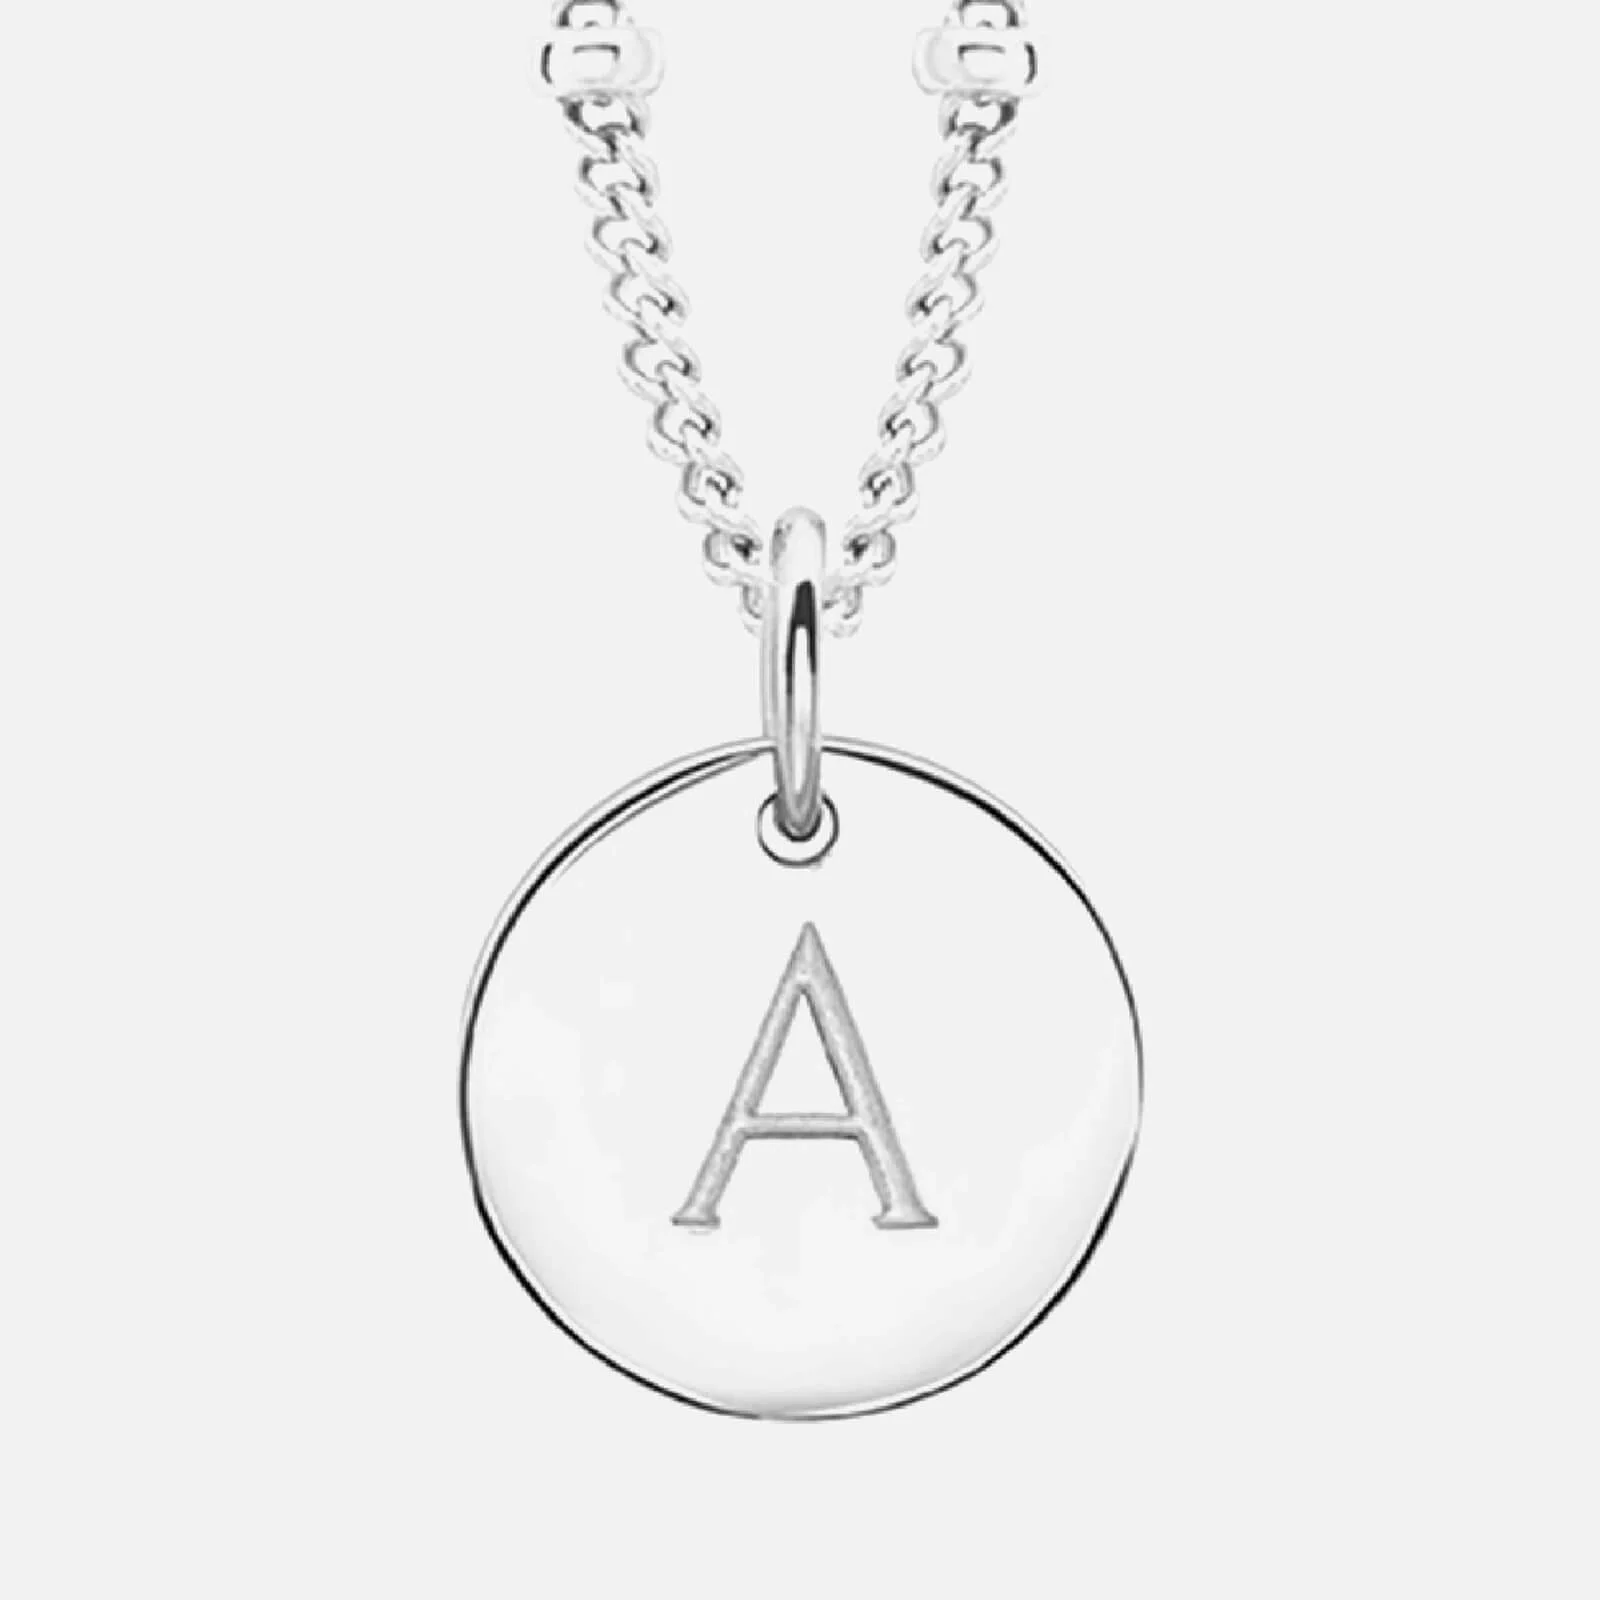 Missoma Women's Initial Charm Necklace - A - Silver Image 1